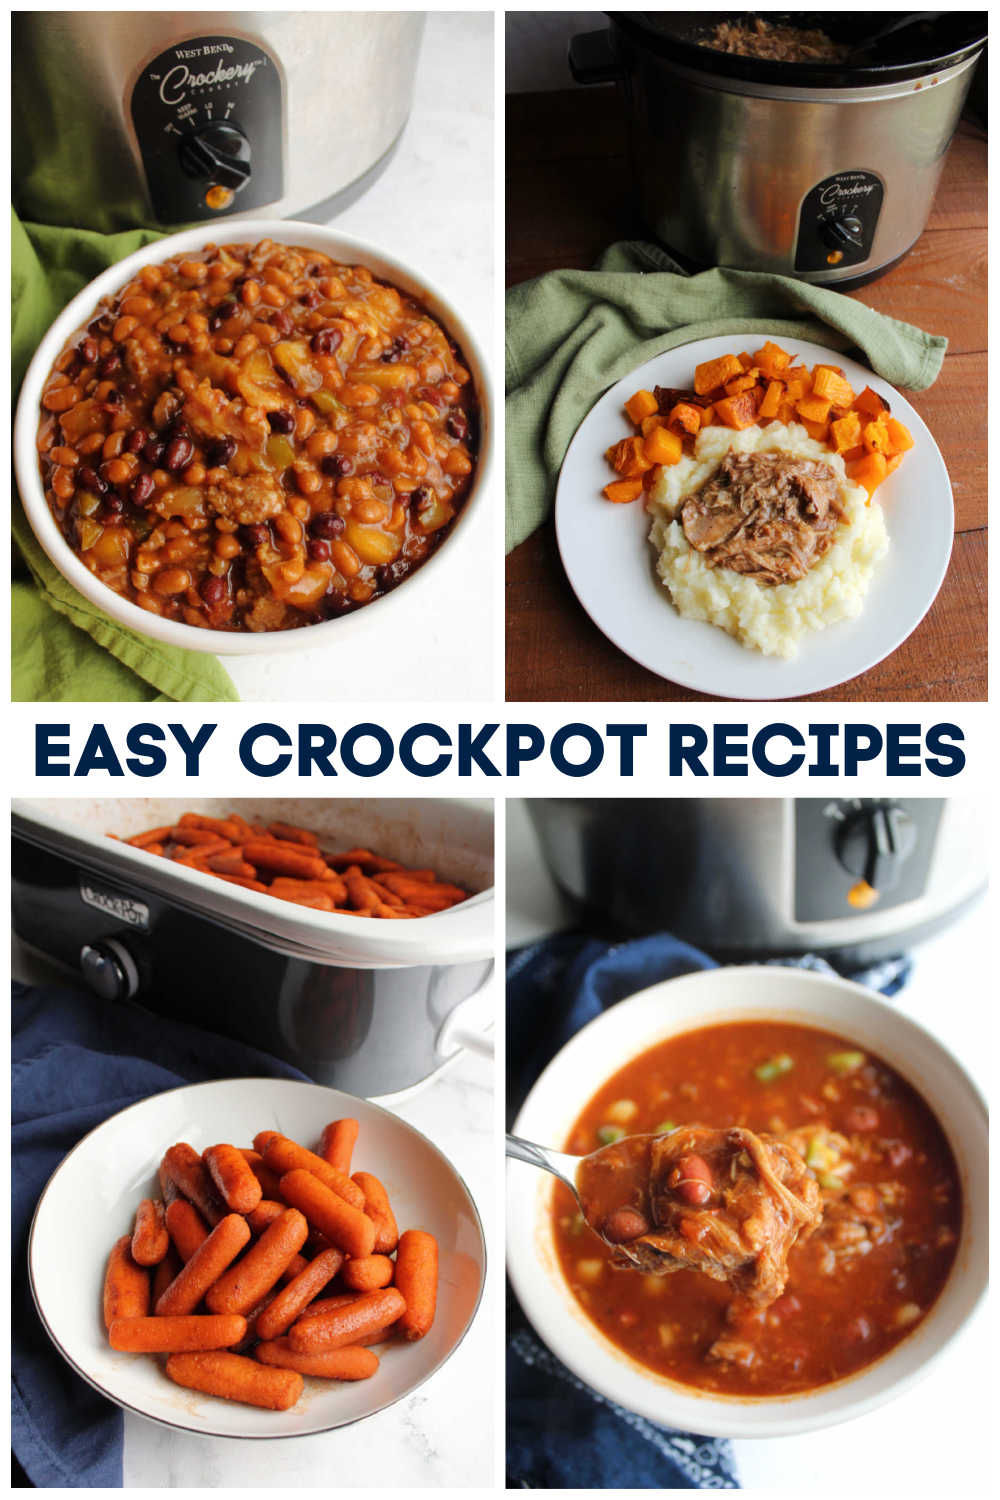 Easy crockpot recipes are the perfect way to feed your family even when your schedule is packed full. These are the very best slow-cooker recipes to help get your Crock-Pot working hard, so you don’t have to! 